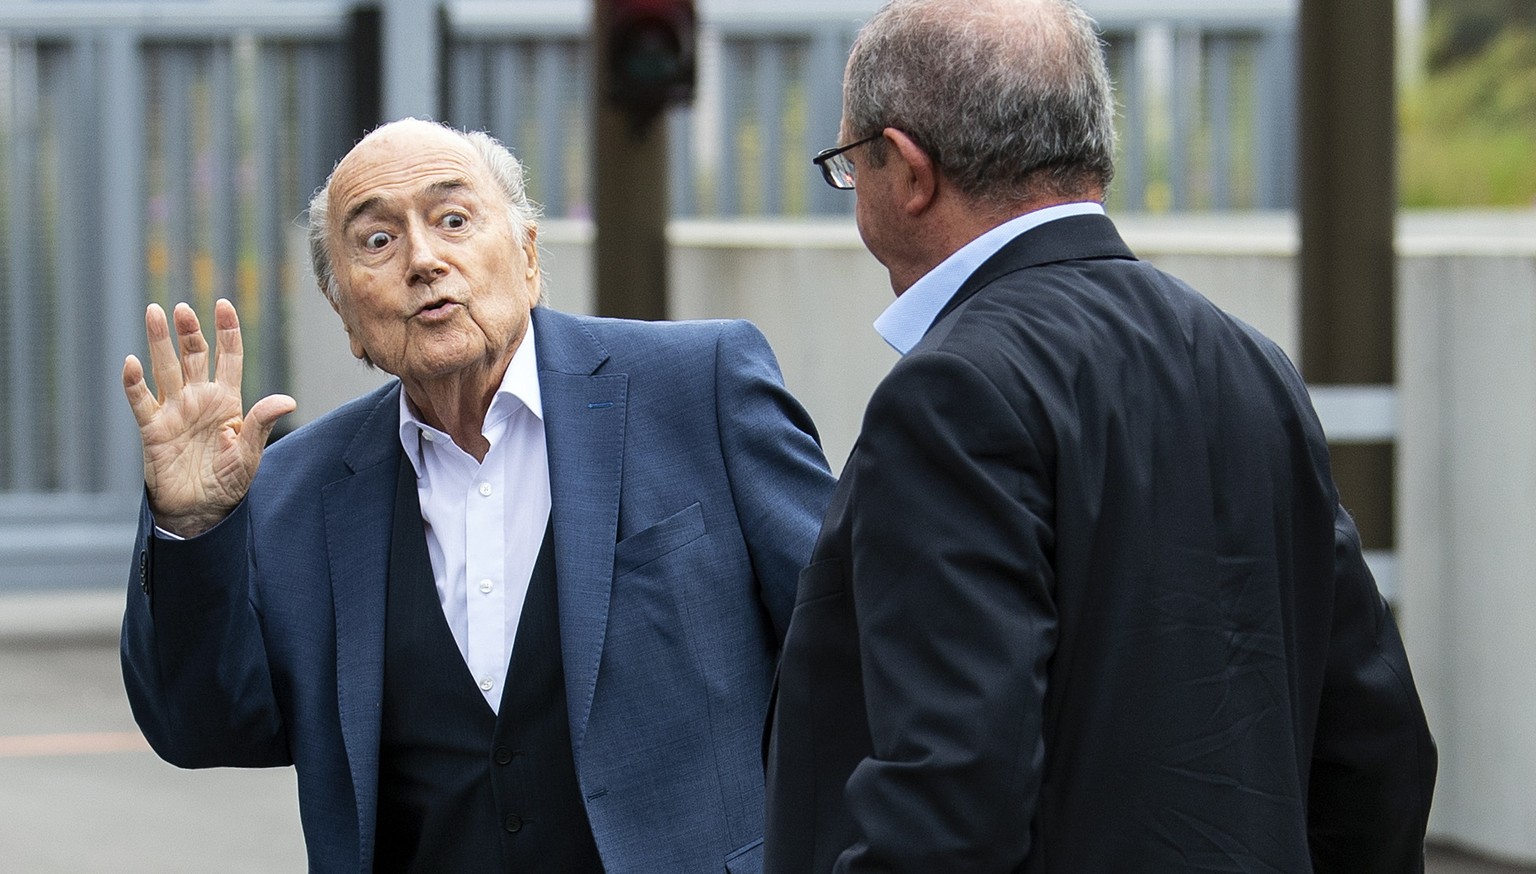 epa08638582 Former FIFA president Sepp Blatter (L) arrives in front of the building of the Office of the Attorney General of Switzerland, in Bern, Switzerland, 01 September 2020. Former UEFA president ...